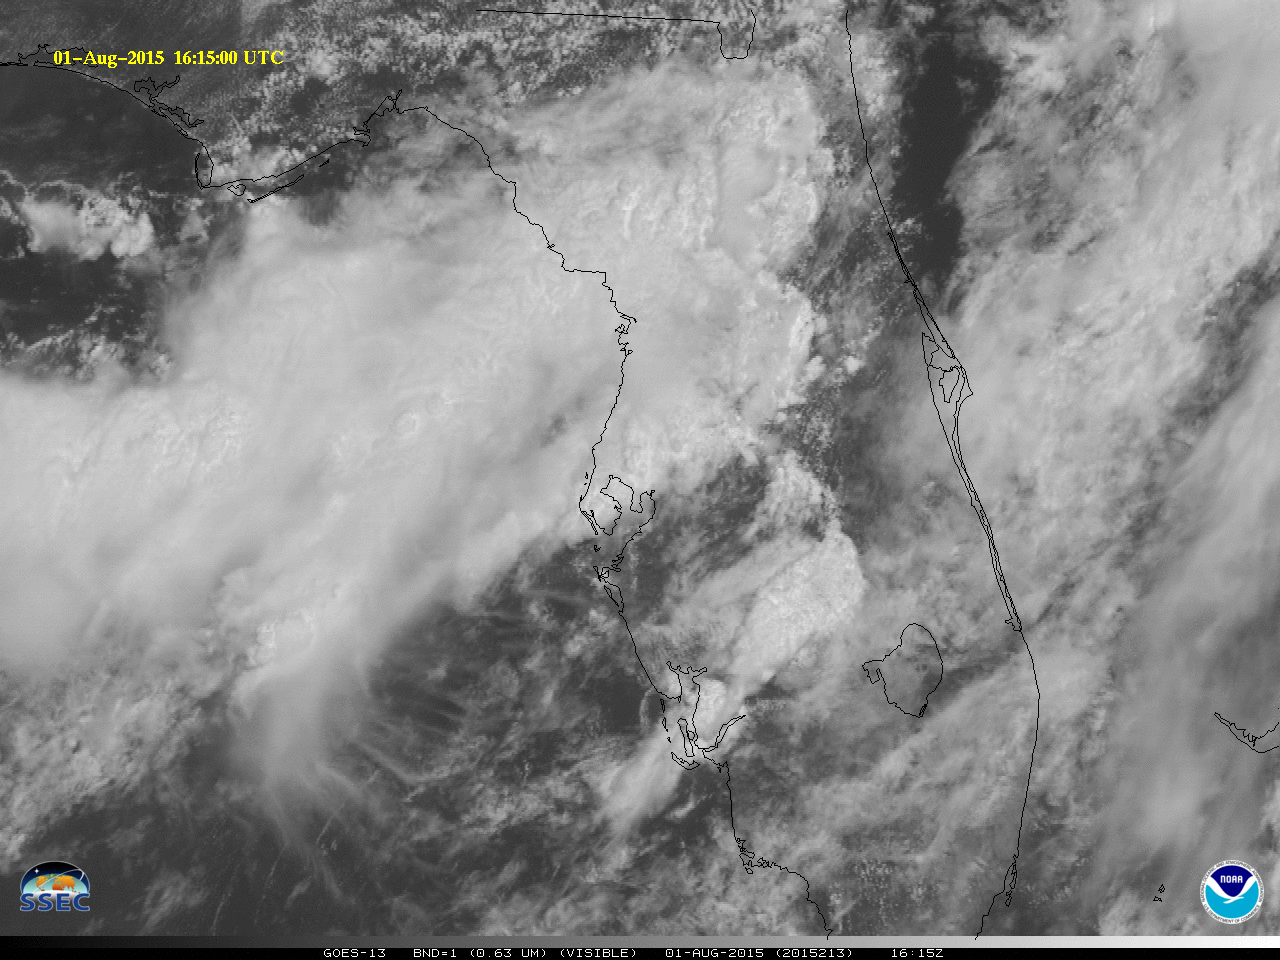 GOES-13 0.63 µm visible imagery [click to play animation]